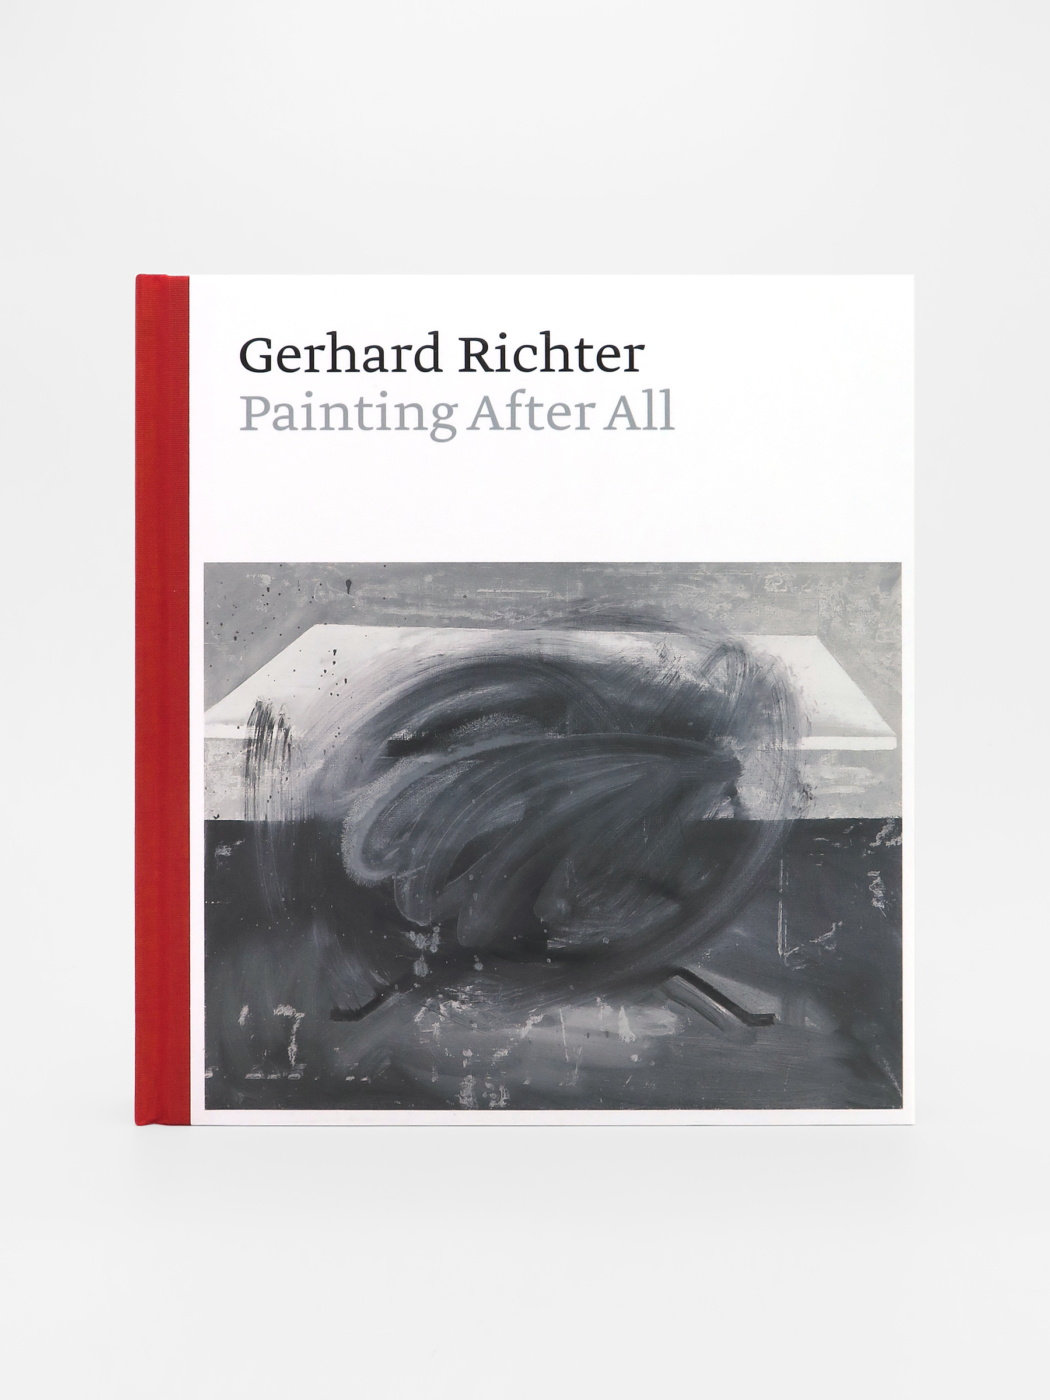 Gerhard Richter, Painting After All